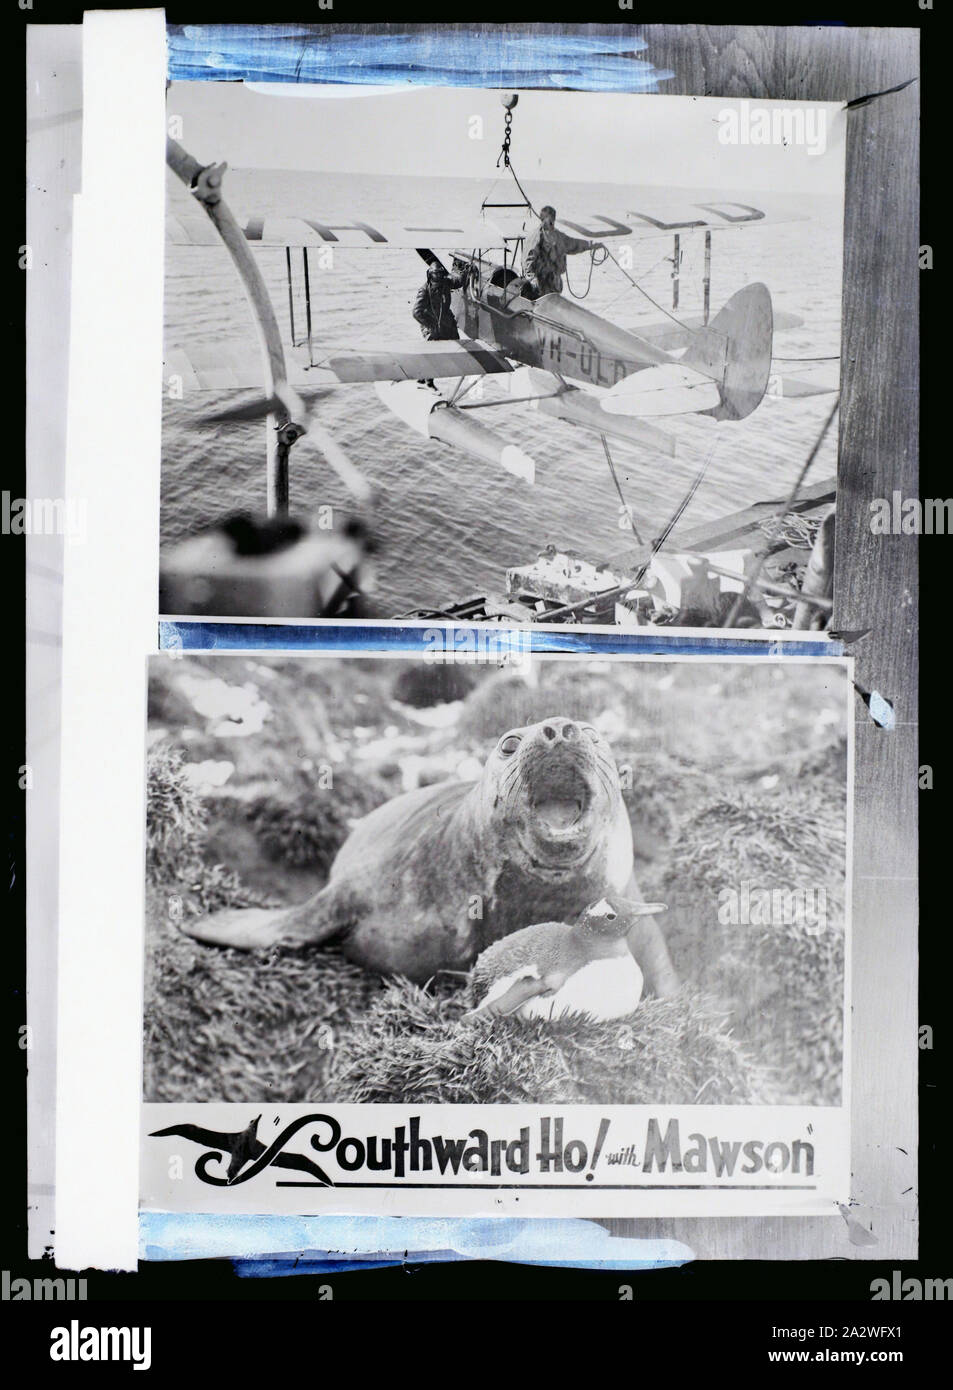 Glass Negative - Copy, Gipsy Moth VH-ULD & 'Southward Ho! With Mawson' BANZARE Voyage 1, Antarctica, 1929-1930, Black and white glass negative of two photographs, the Gipsy Moth VH-ULD & 'Southward Ho! With Mawson', Antarctica. One of 328 images in various formats including artworks, photographs, glass negatives and lantern slides Stock Photo